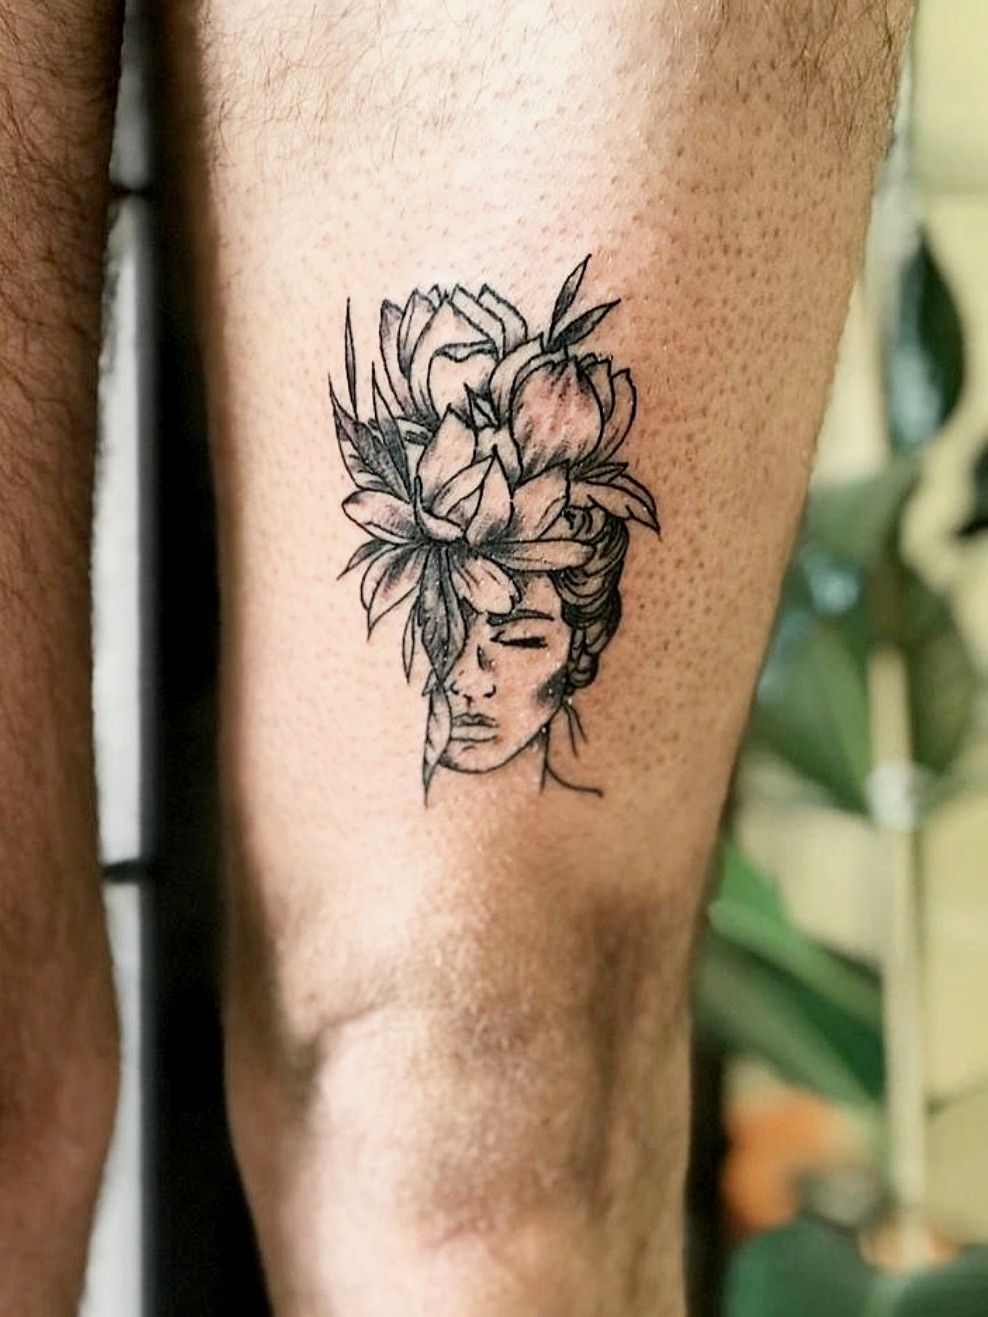 Celebrity Ink Tattoo Phuket on Instagram Because theres more to it than just  ink and a needle its an experience that should be enjoyable Celebrity Ink  is more than just a